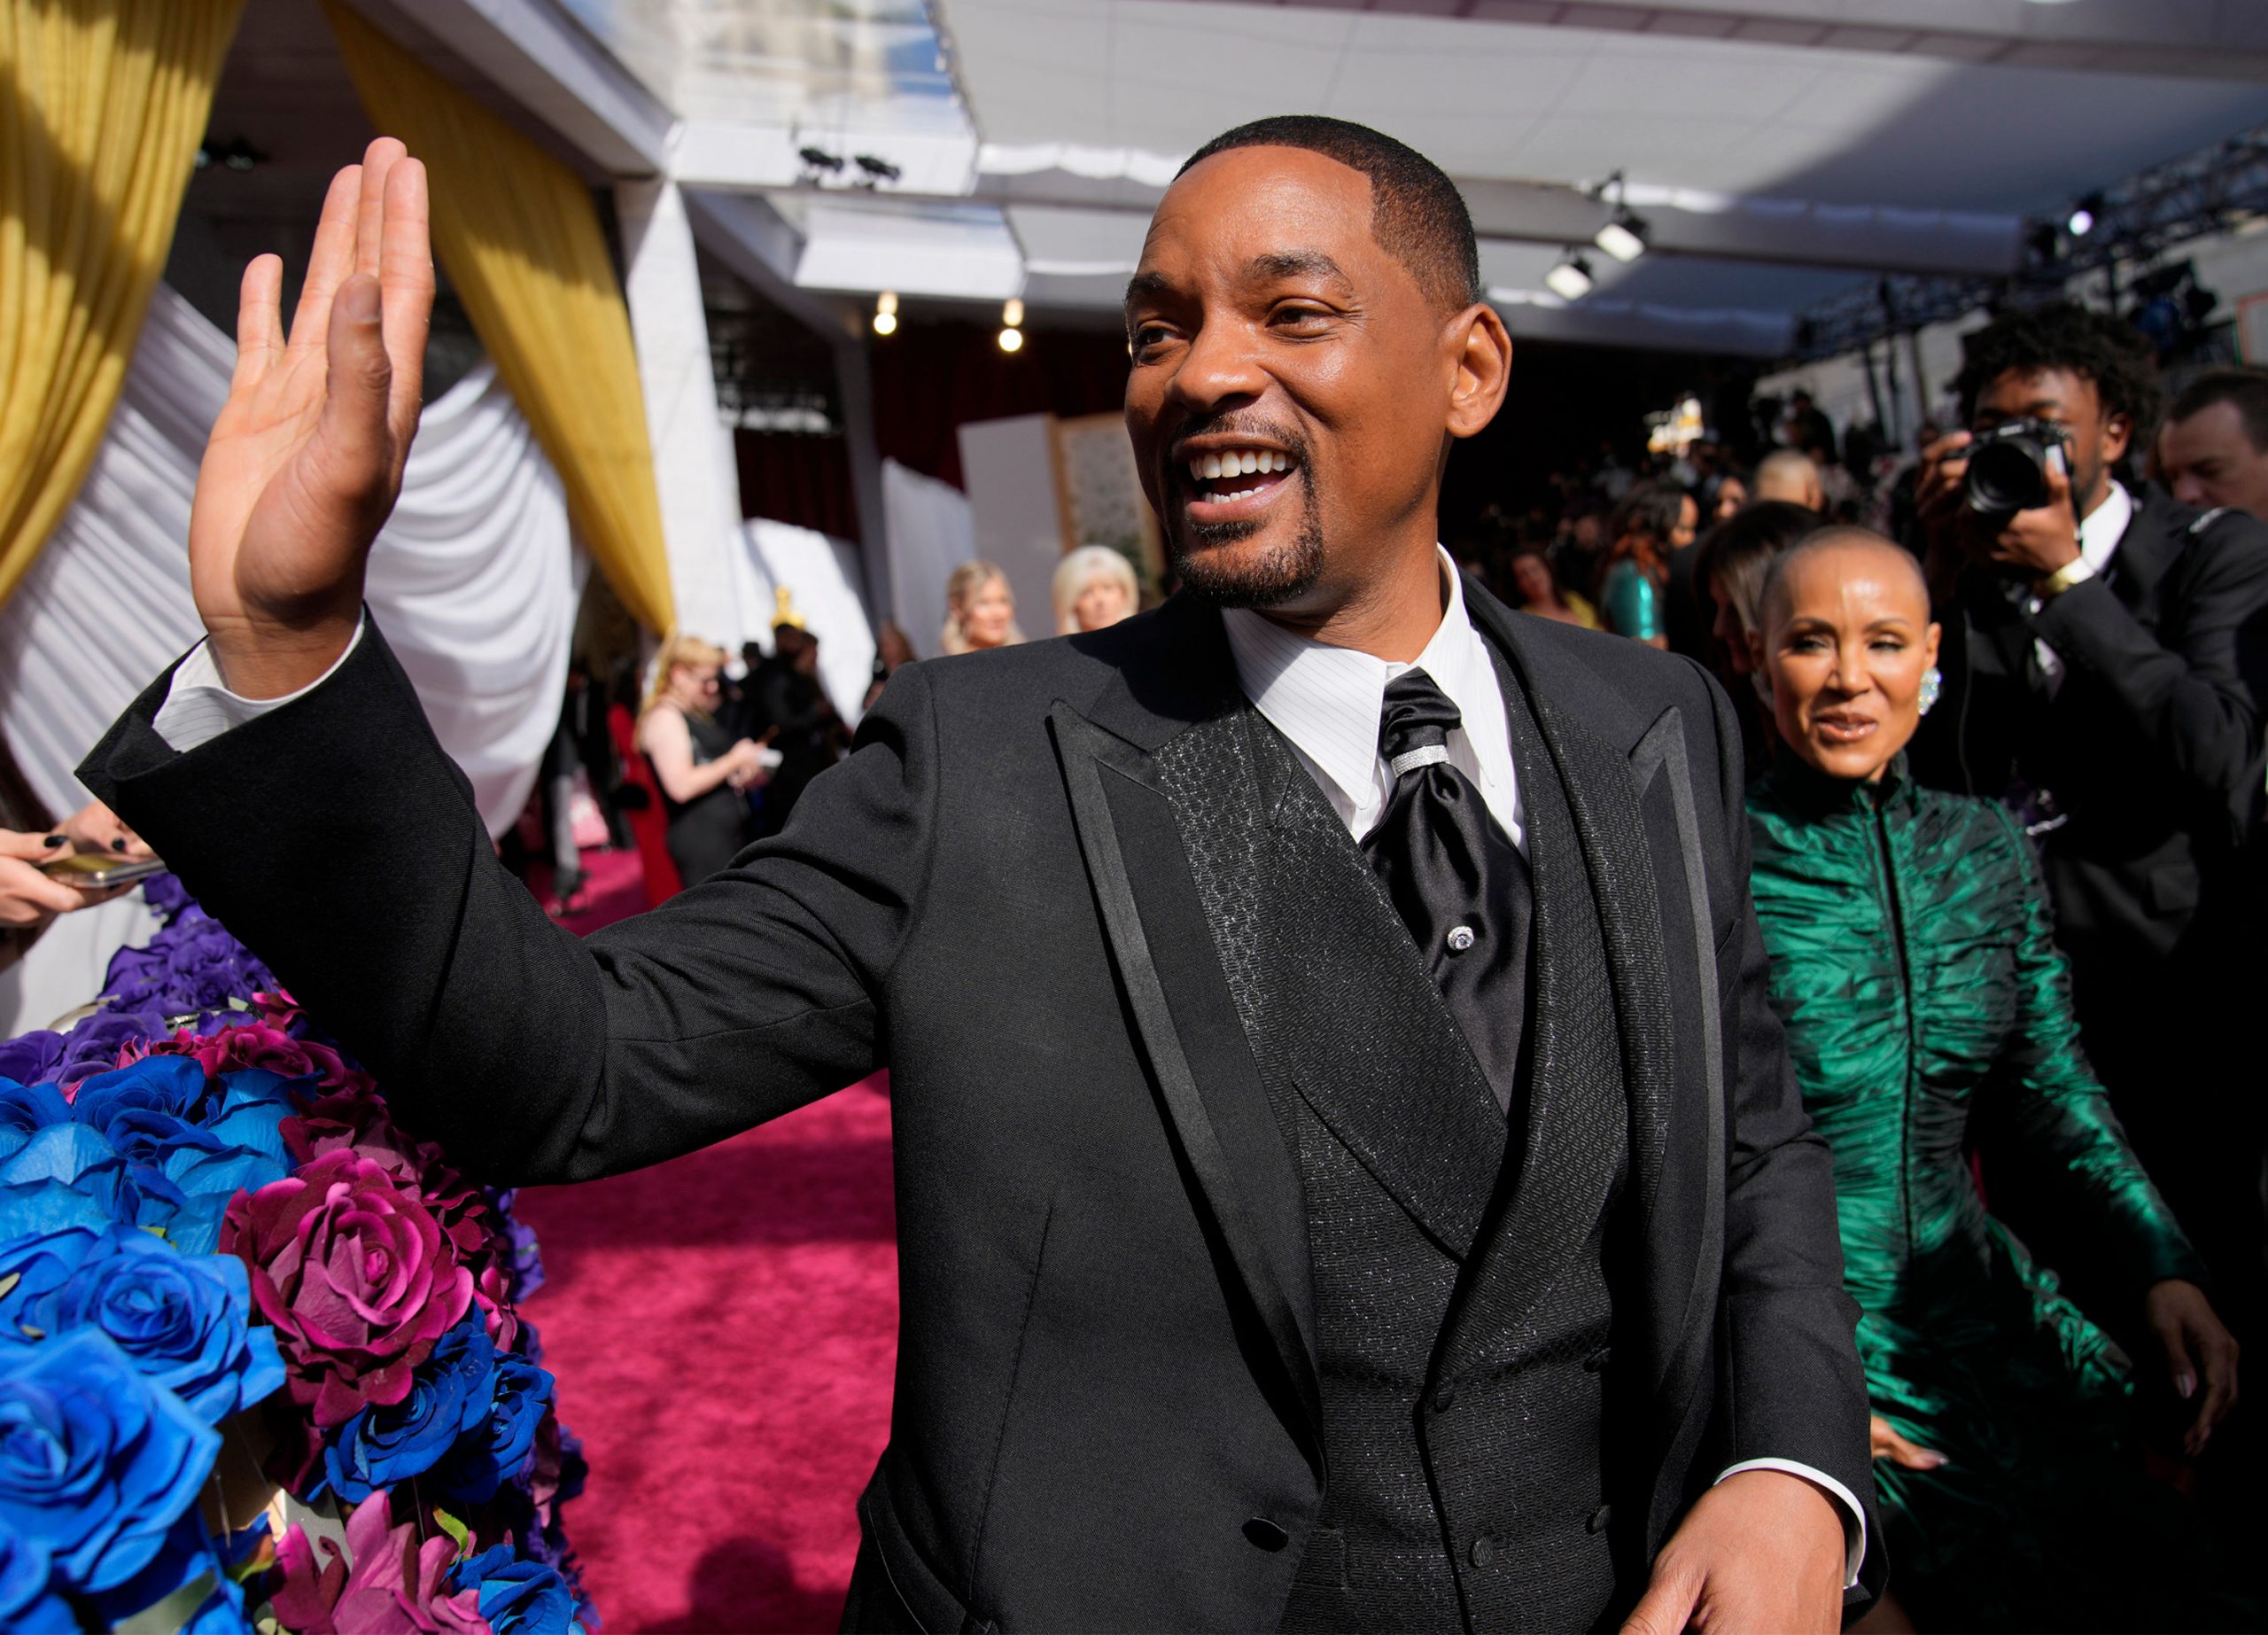 Oscars 2022: Will Smith wins Best Actor for ‘King Richard’